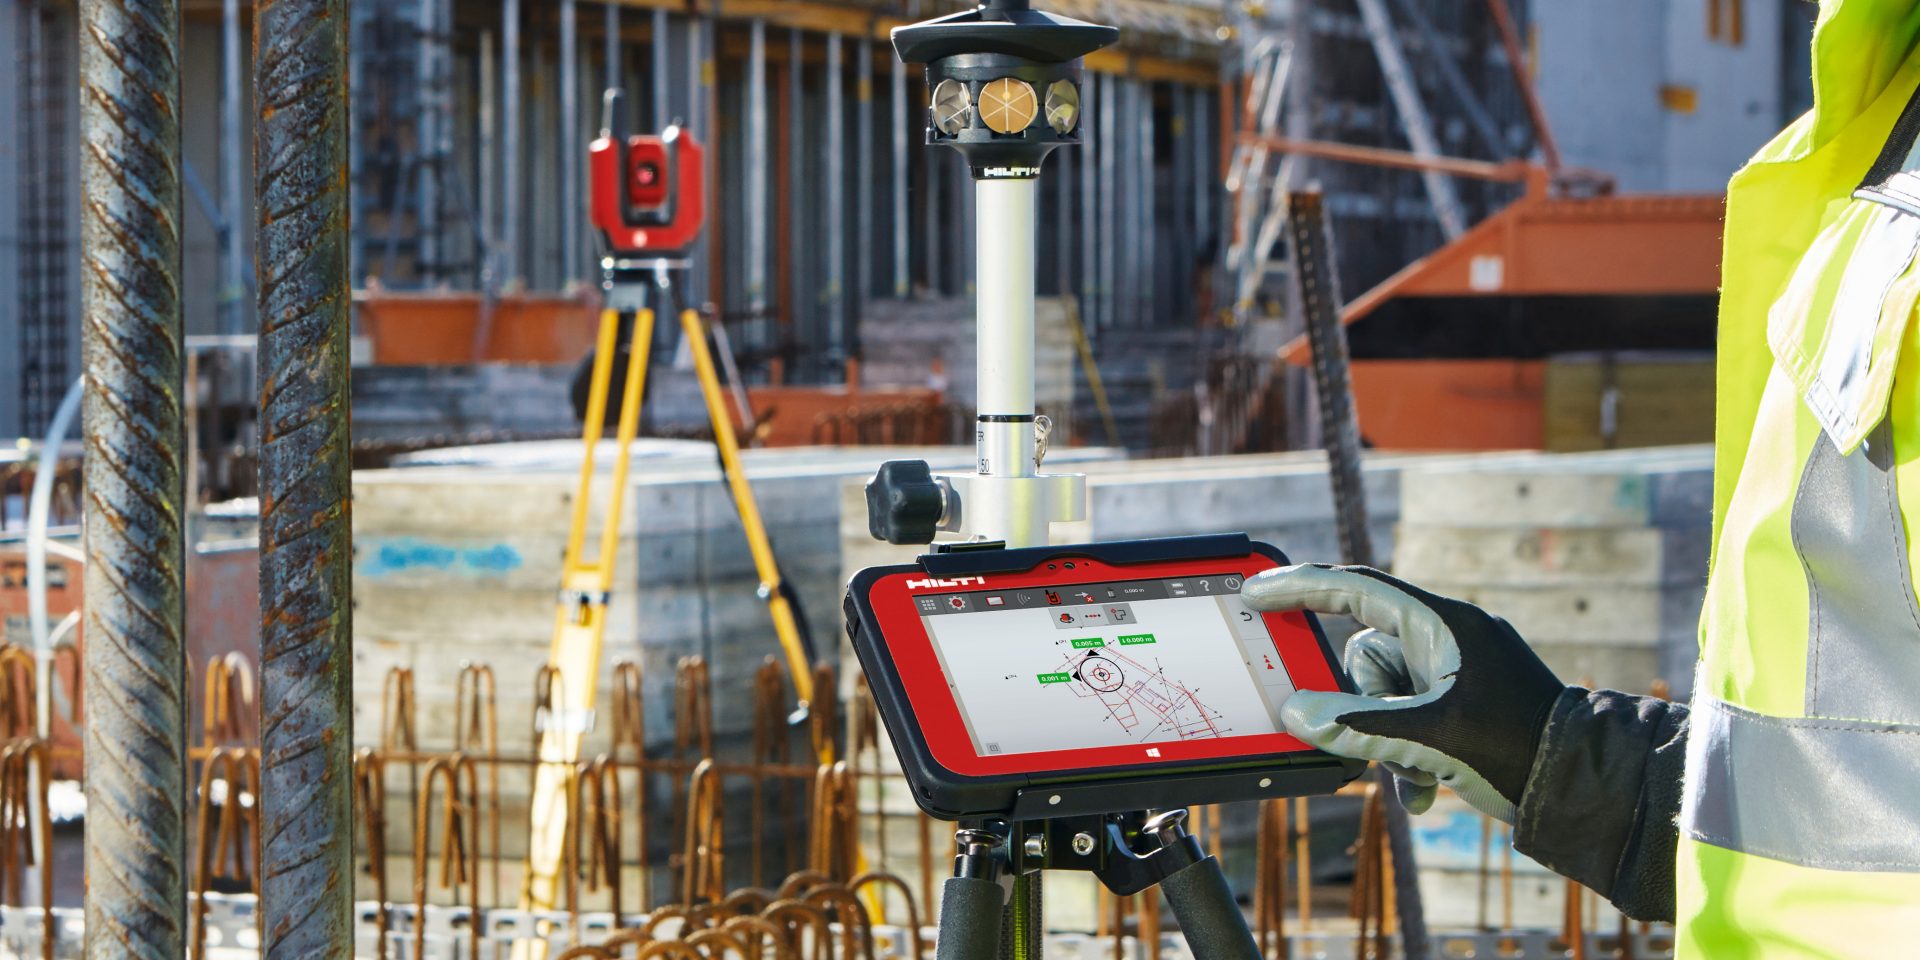 Construction worker using BIM-compatible layout tool to locate building elements on a jobsite